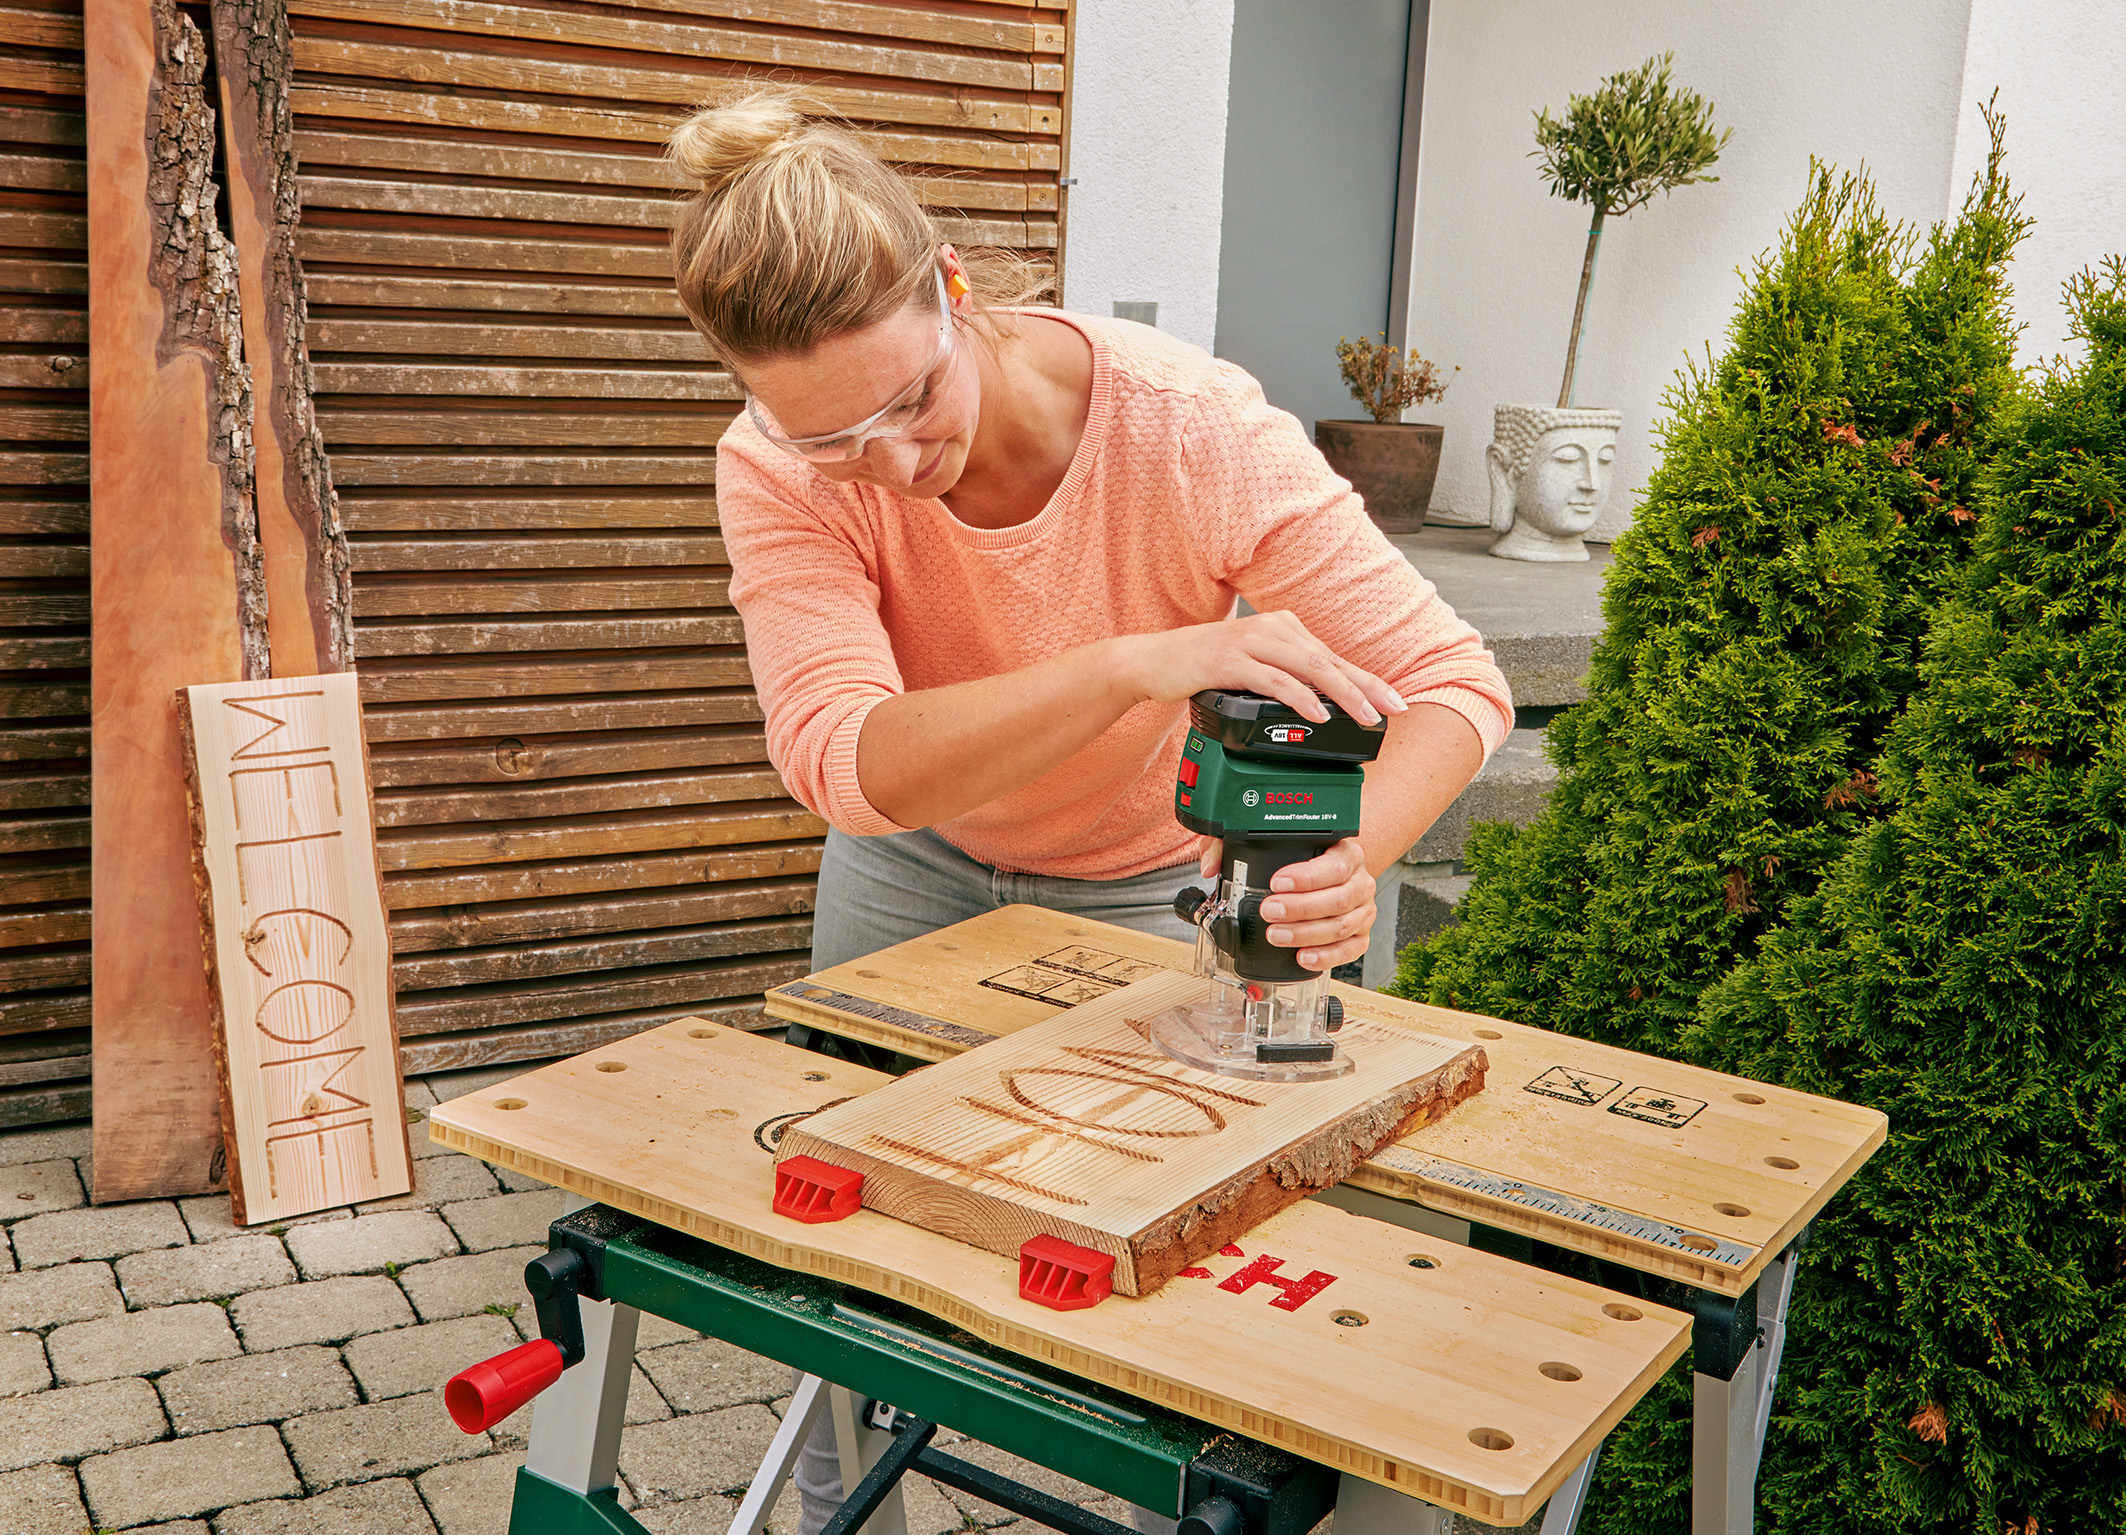 Ideal for milling edges, slots, and creative motifs: First cordless trim router from Bosch for DIYers